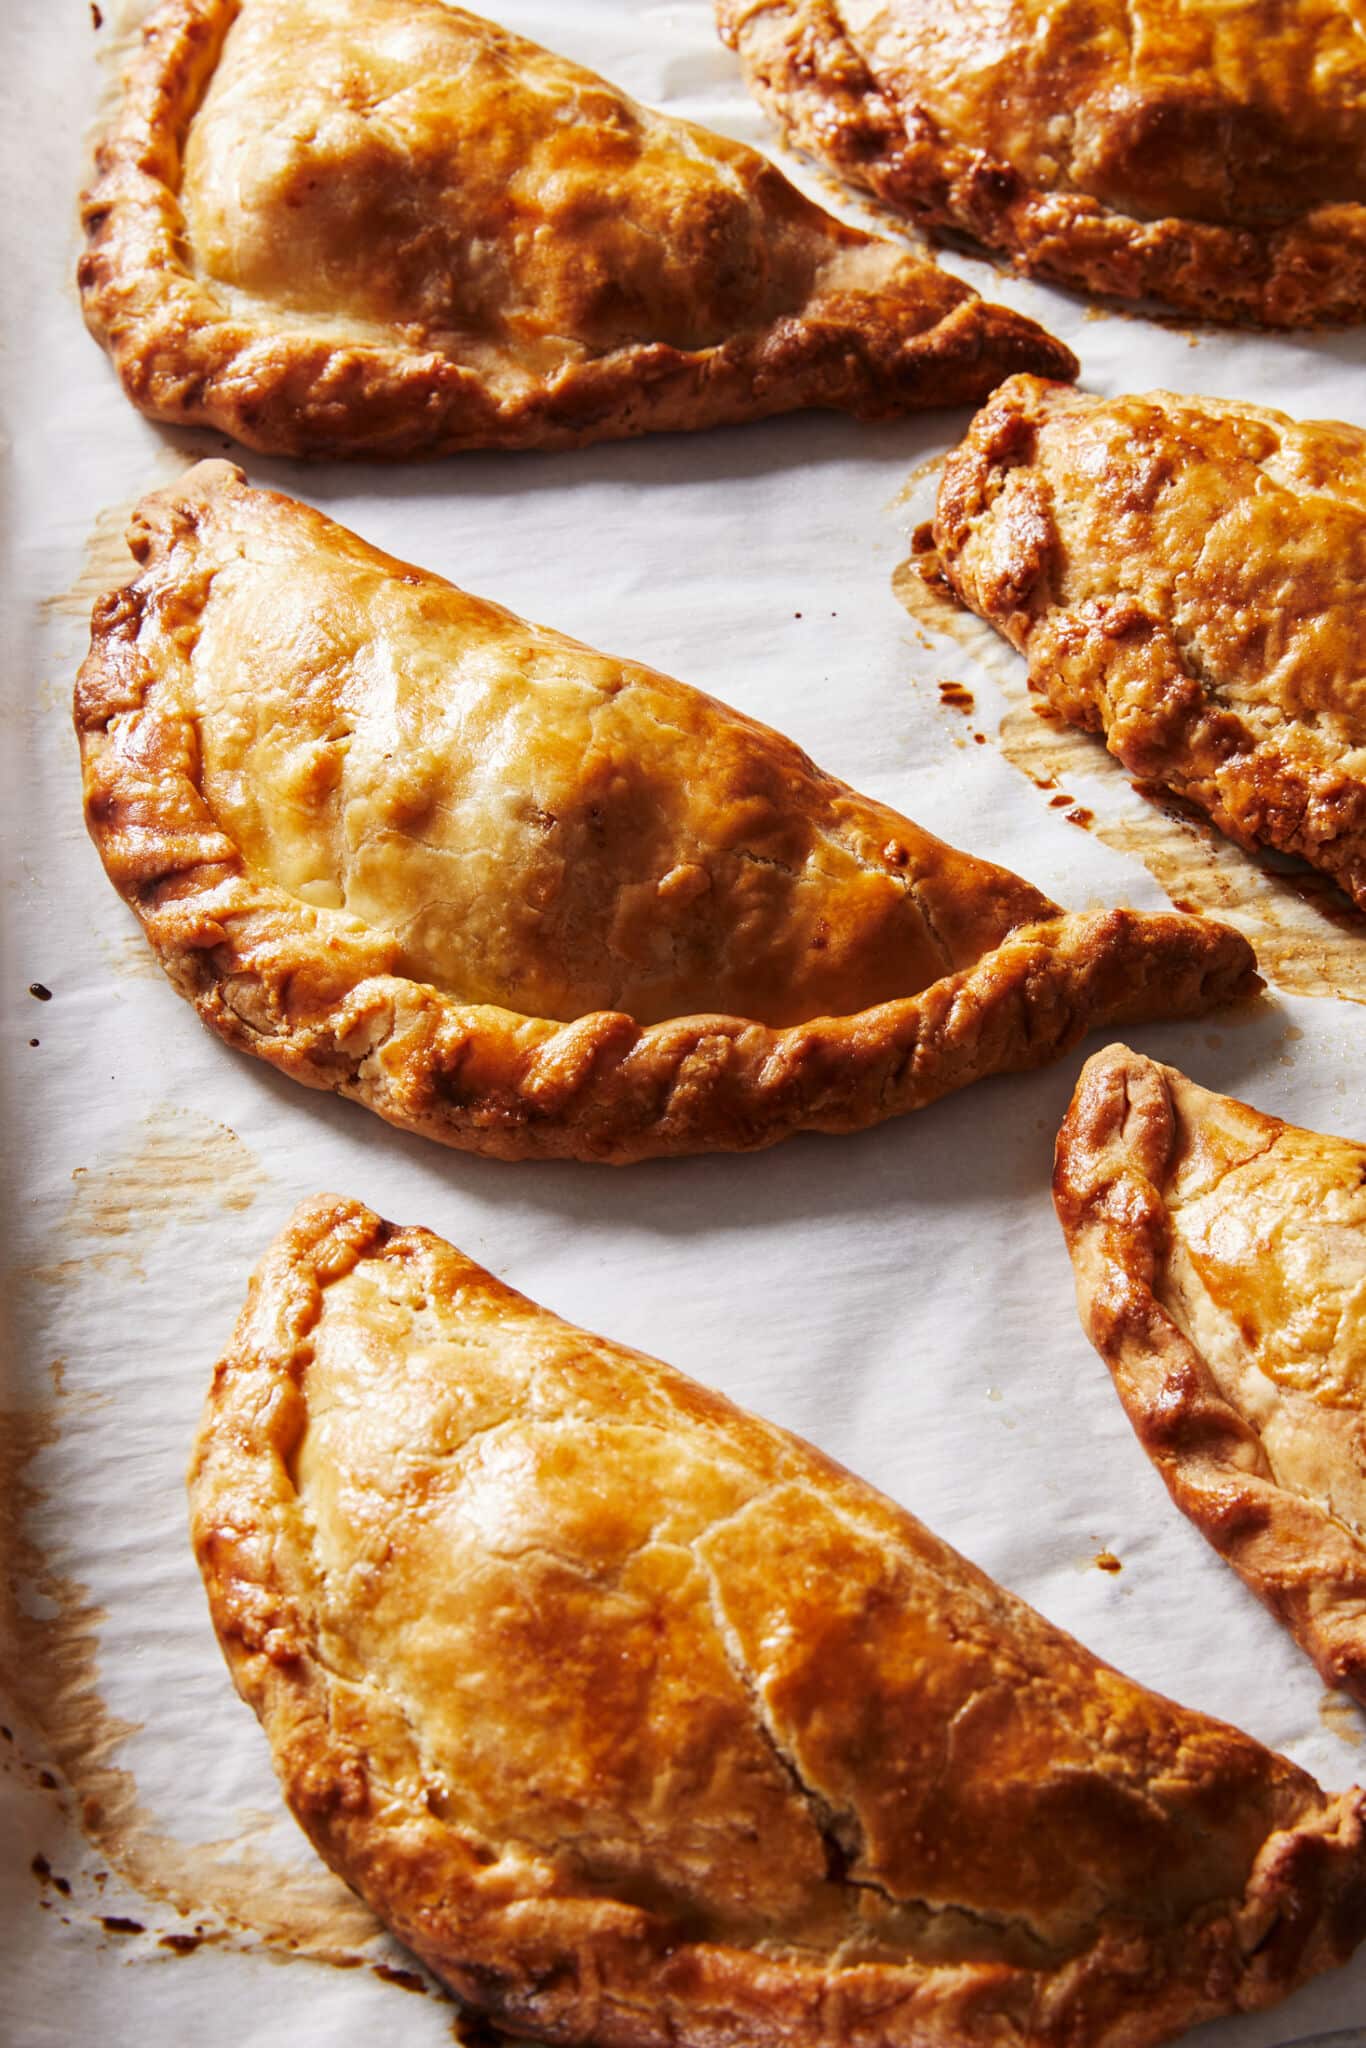 Potato and Cheddar Pastries are baked until golden brown with crispy flaky crust.